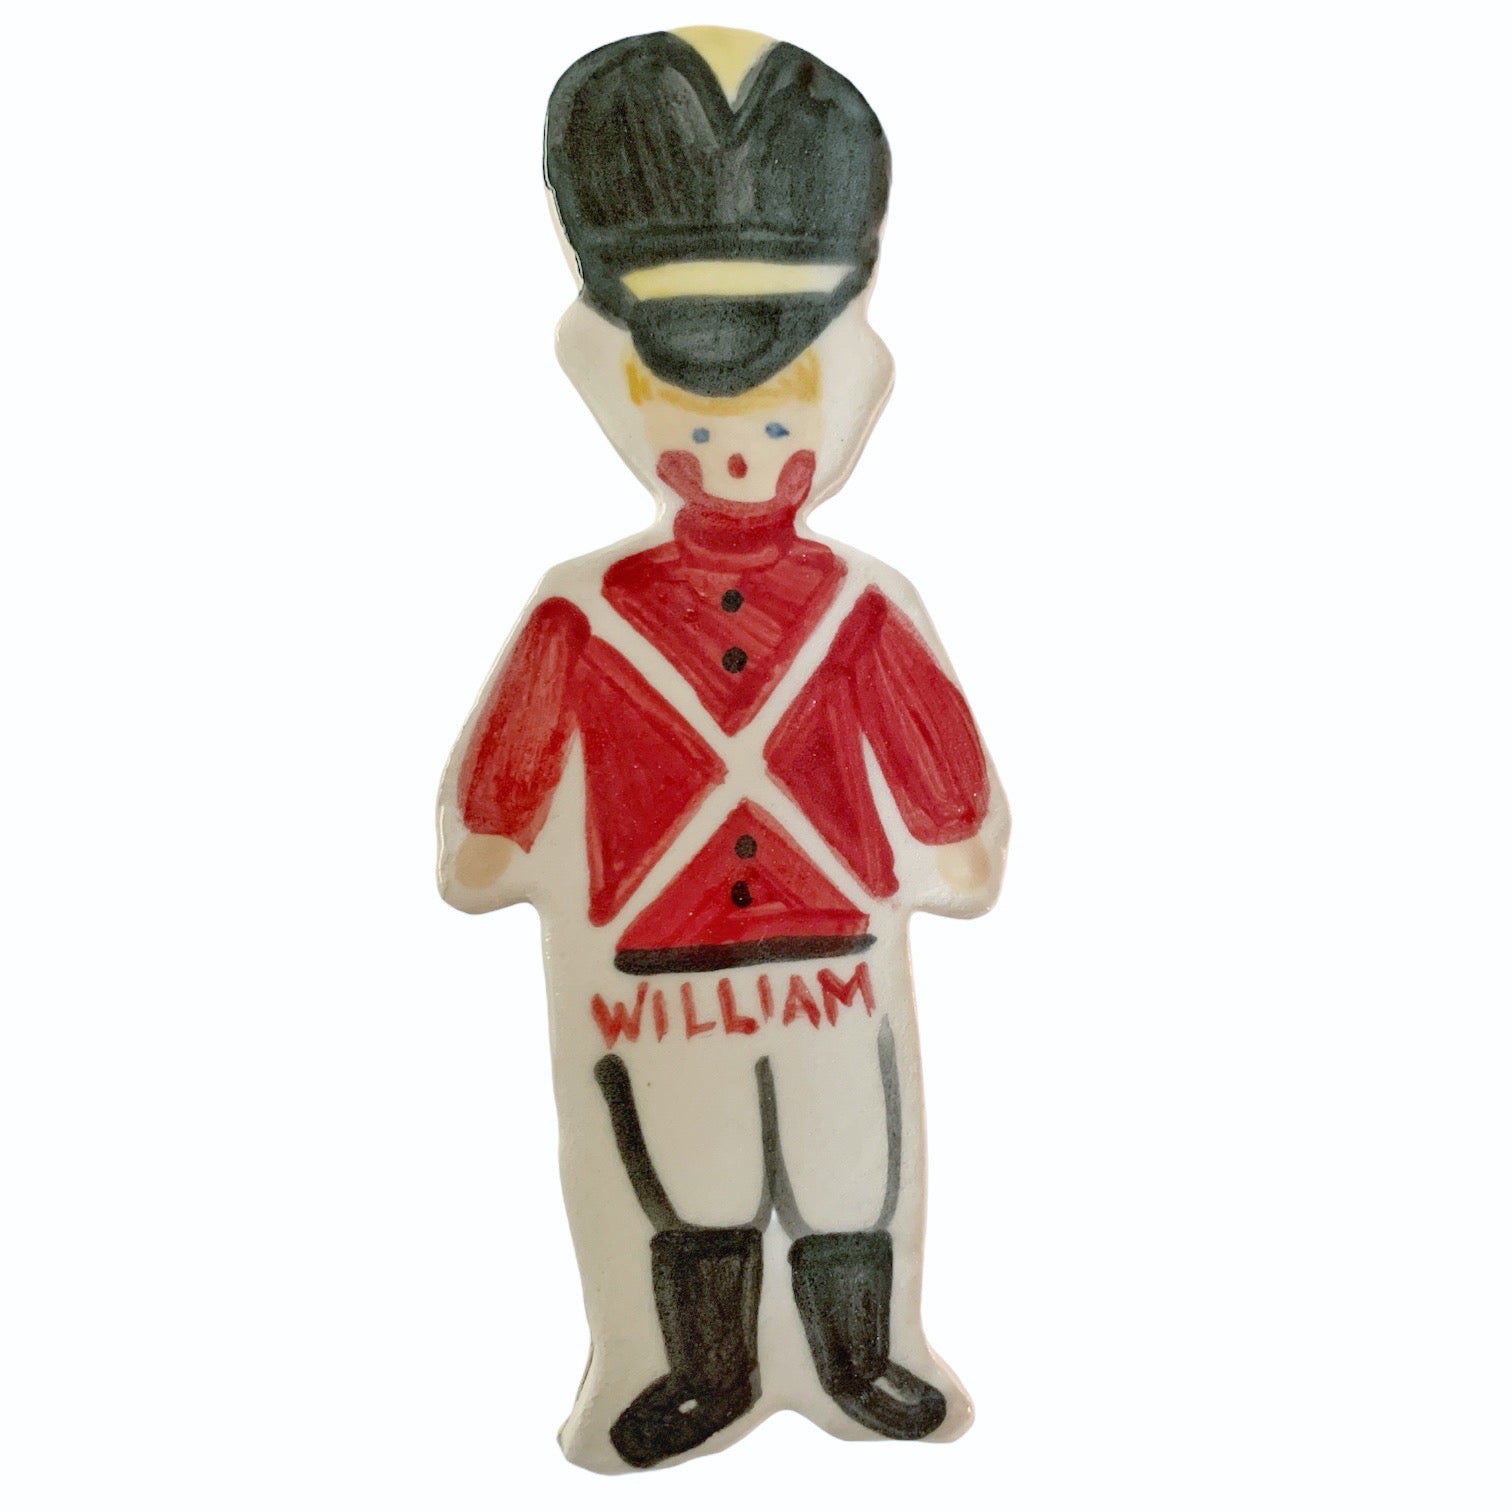 Royal Guard - Toy Soldier Ornament